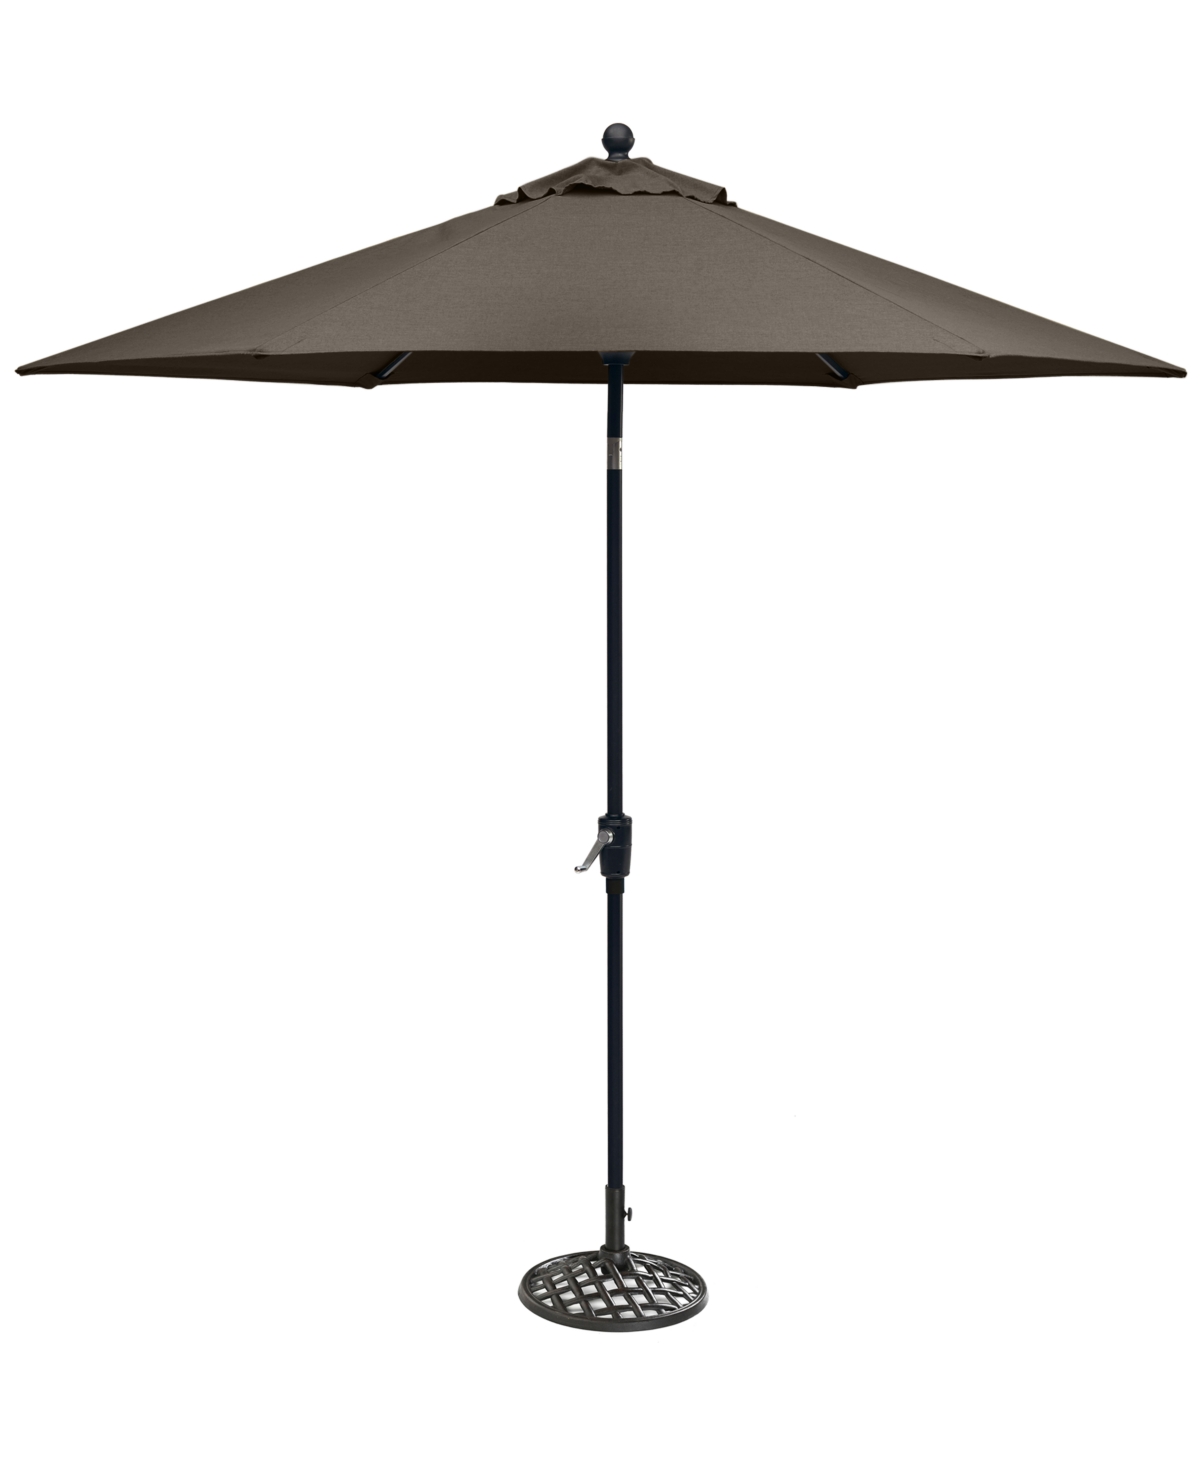 Chateau Outdoor 9 Push Button Tilt Umbrella with Outdoor Fabric and Base, Created for Macys